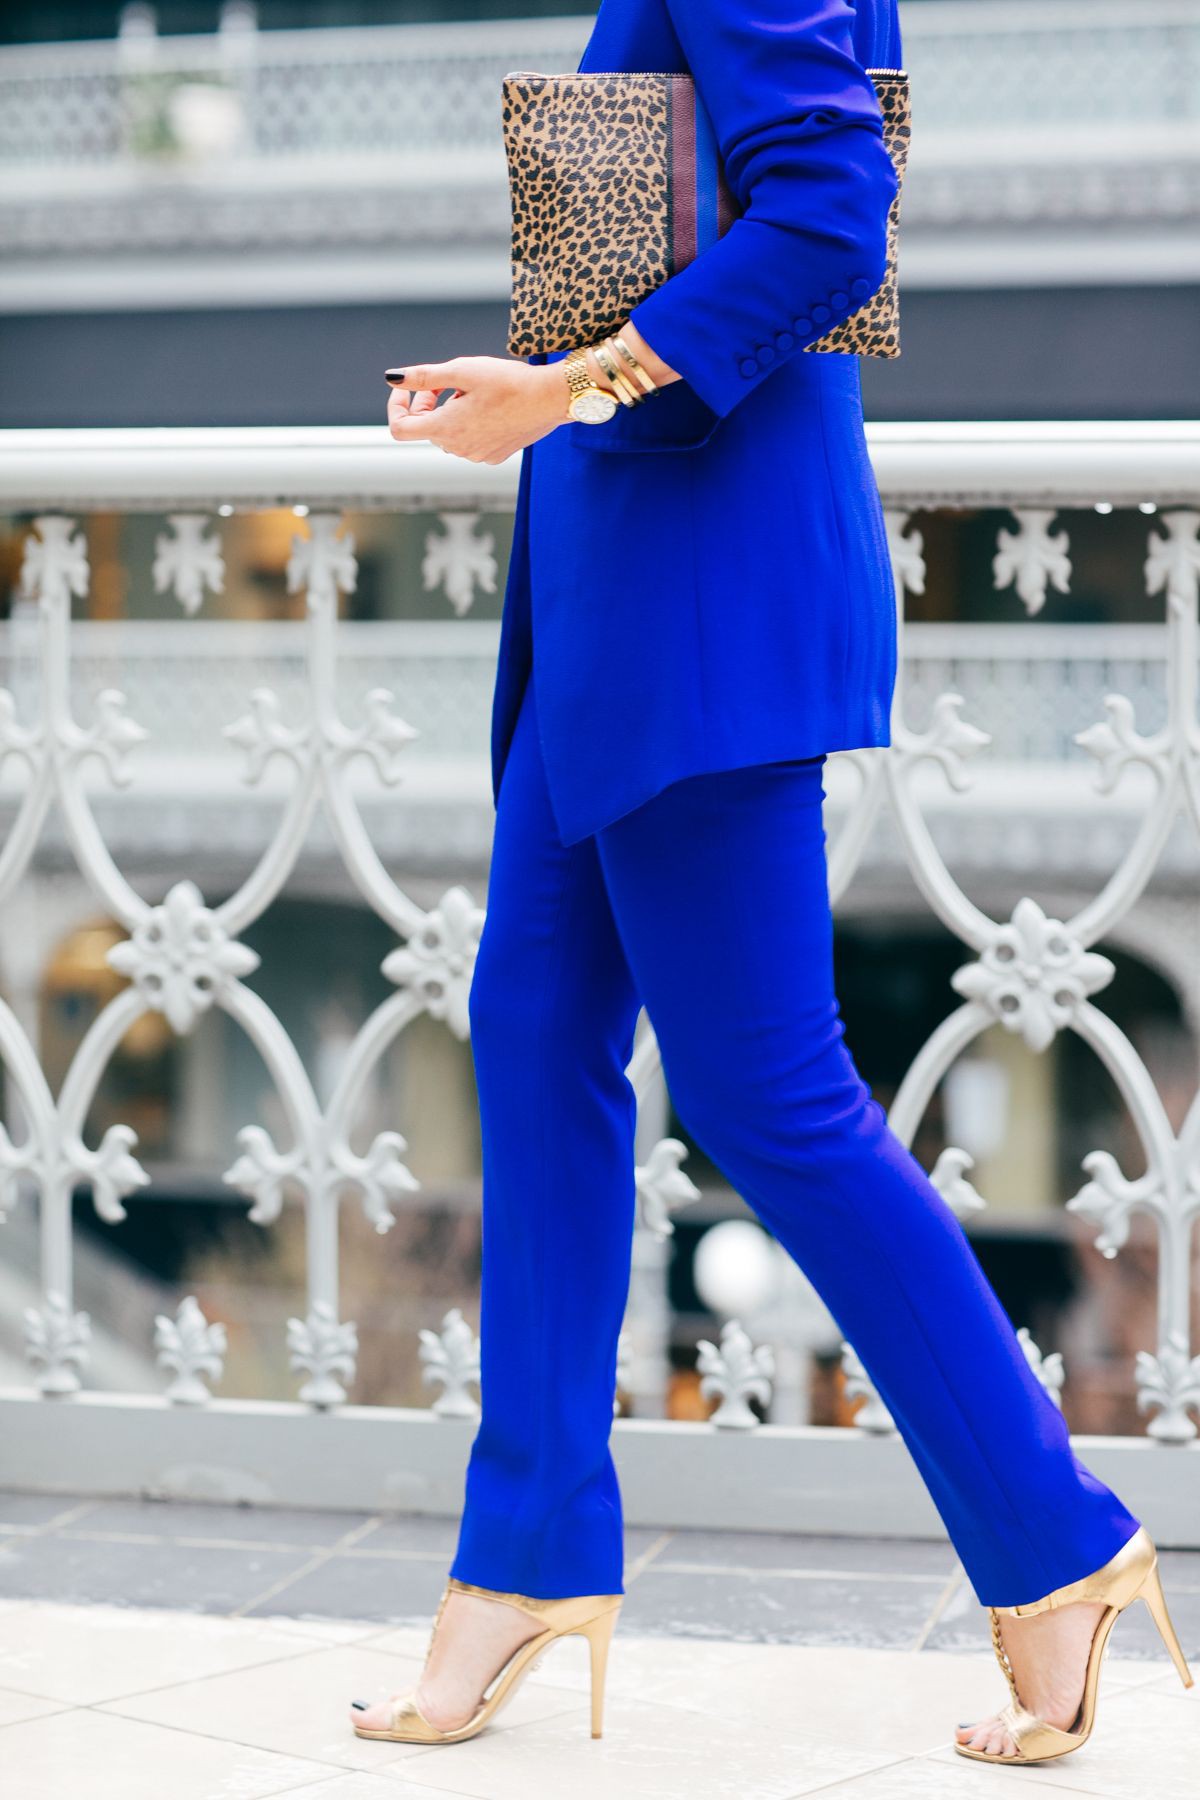 Find out new cobalt blue, Royal blue: High-Heeled Shoe,  Royal blue,  Cobalt blue,  Blazer Outfit,  Street Style,  Casual Outfits  